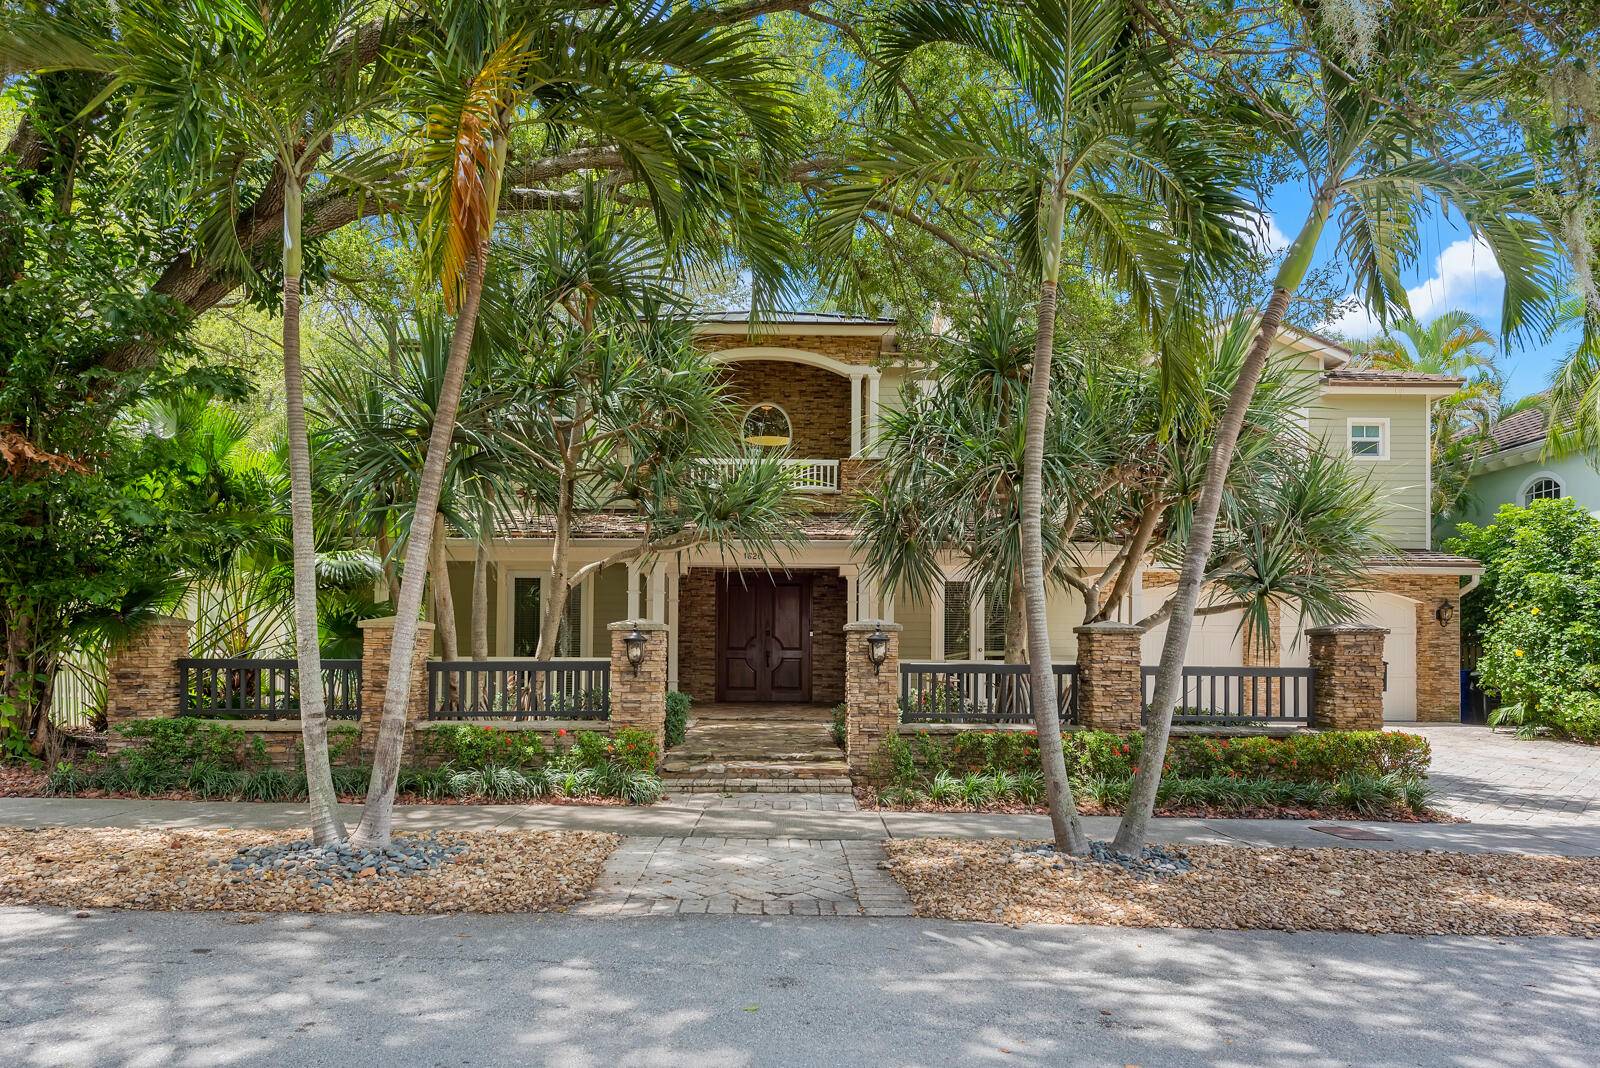 Large private estate in historic Colle Hammock minutes from Las Olas Blvd.